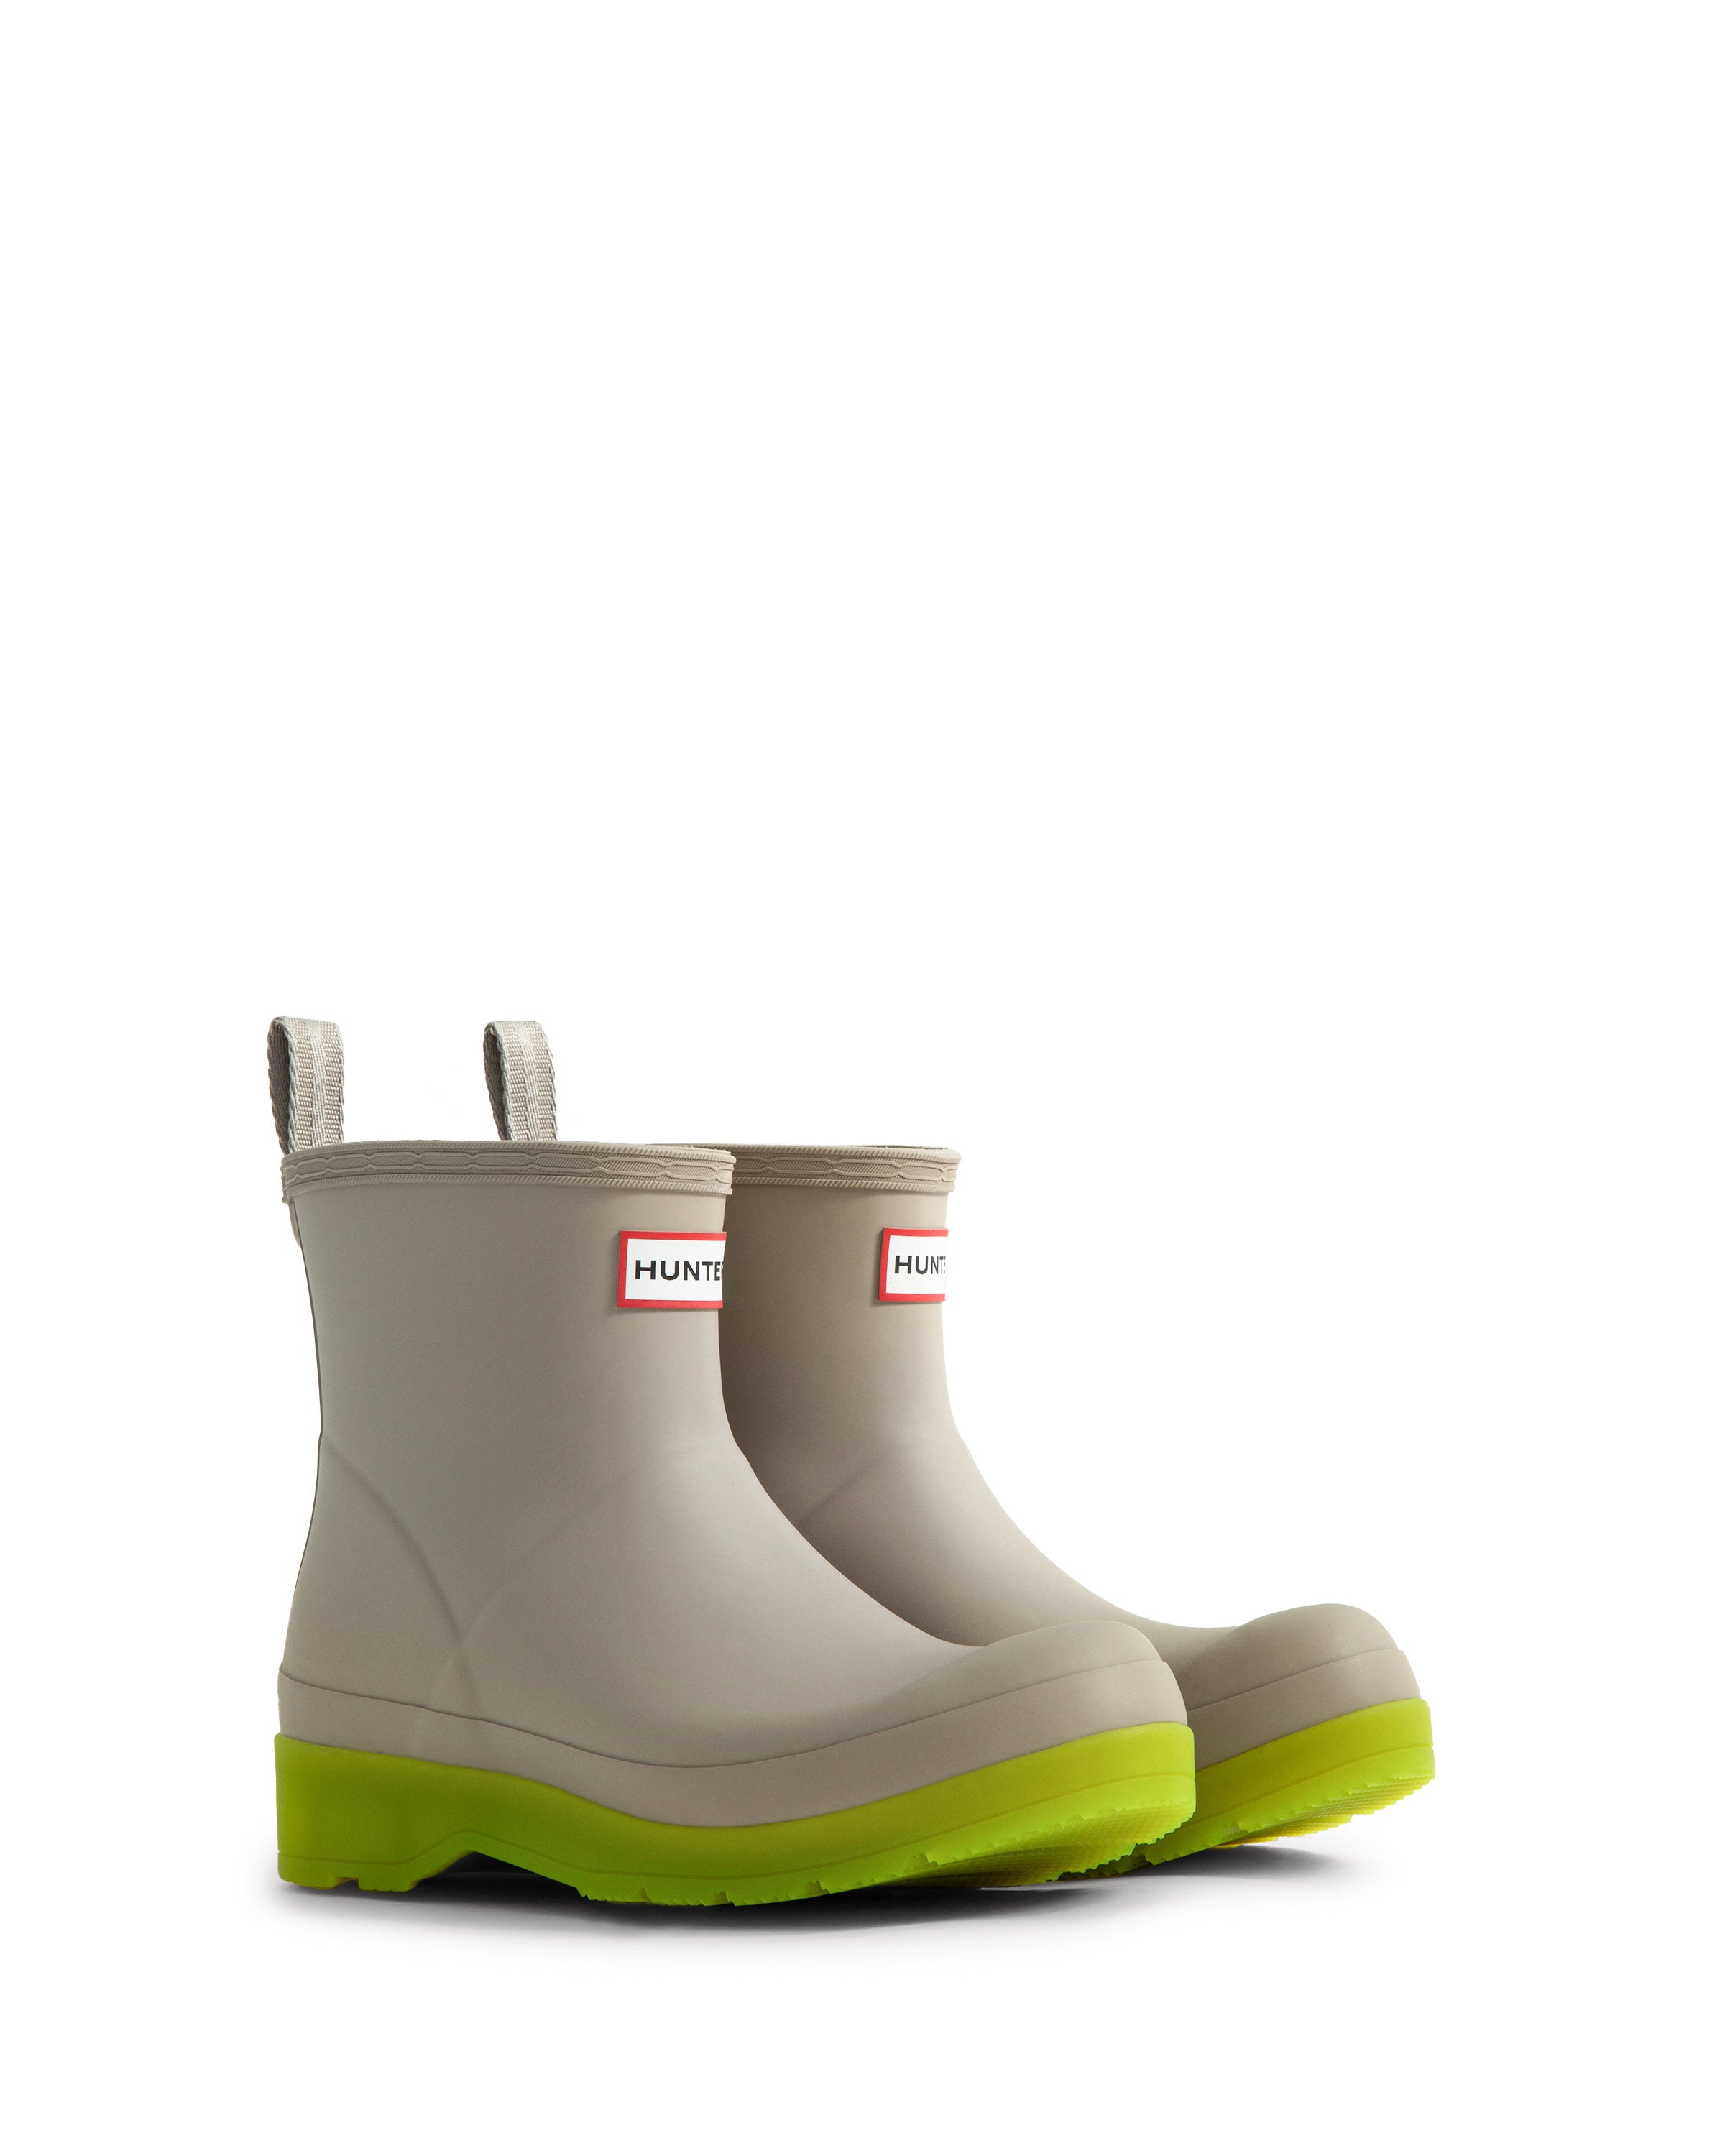 Women's Play Short Translucent Sole Boots - Skimming Stone/Acid Green